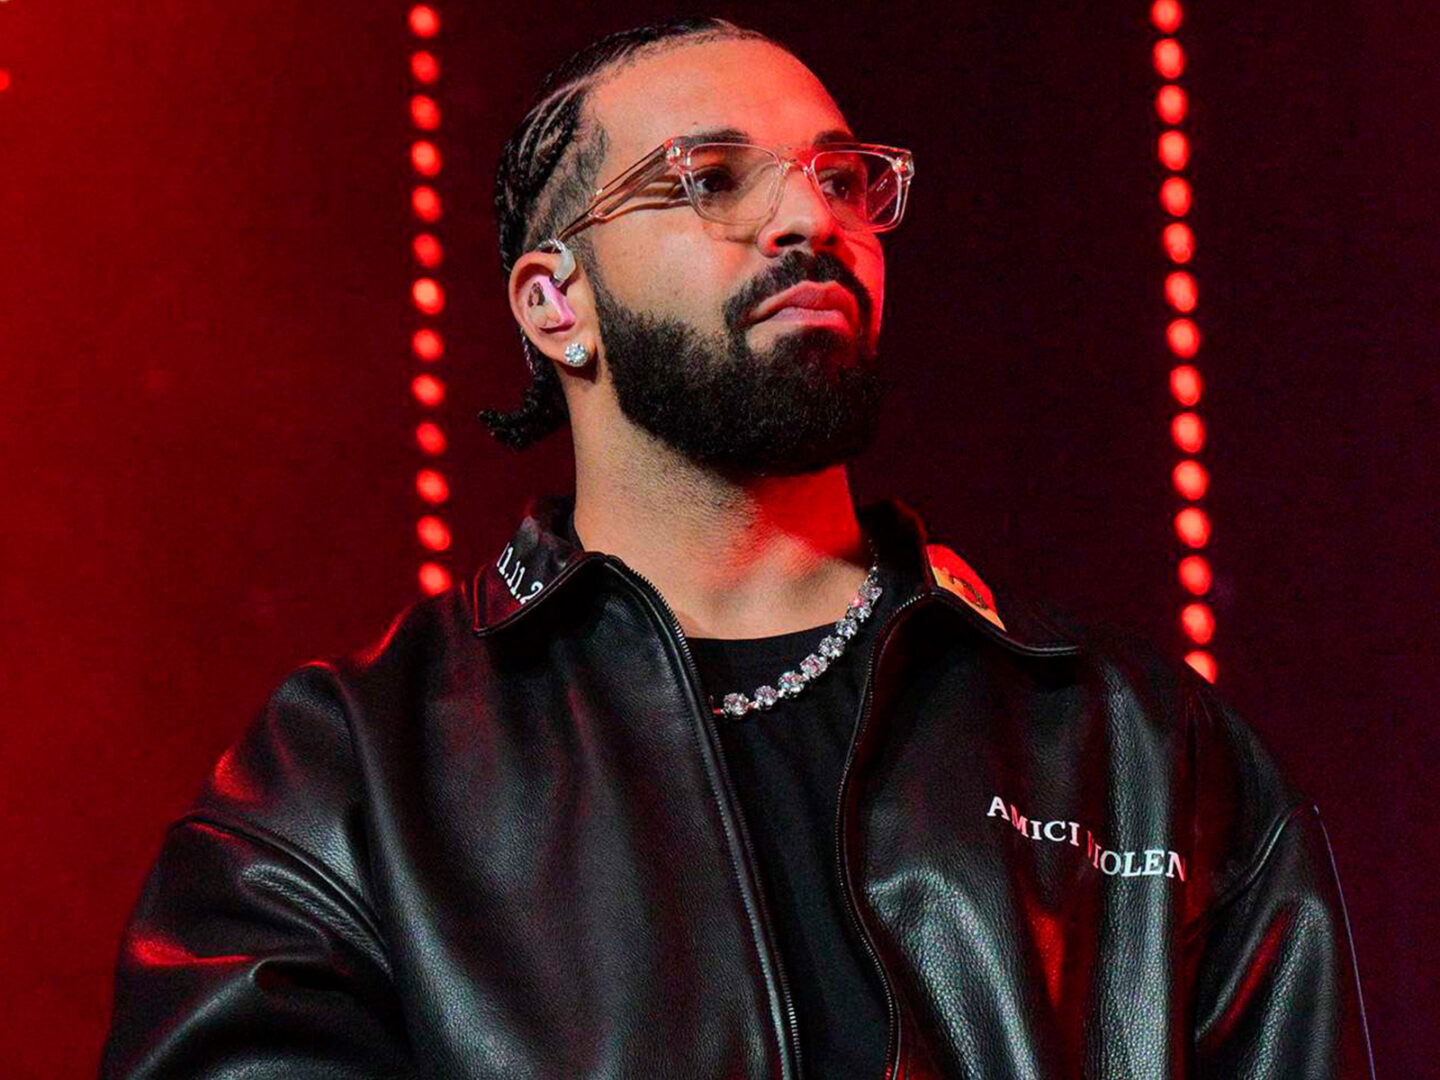 Drake to take a break from music due to health issues